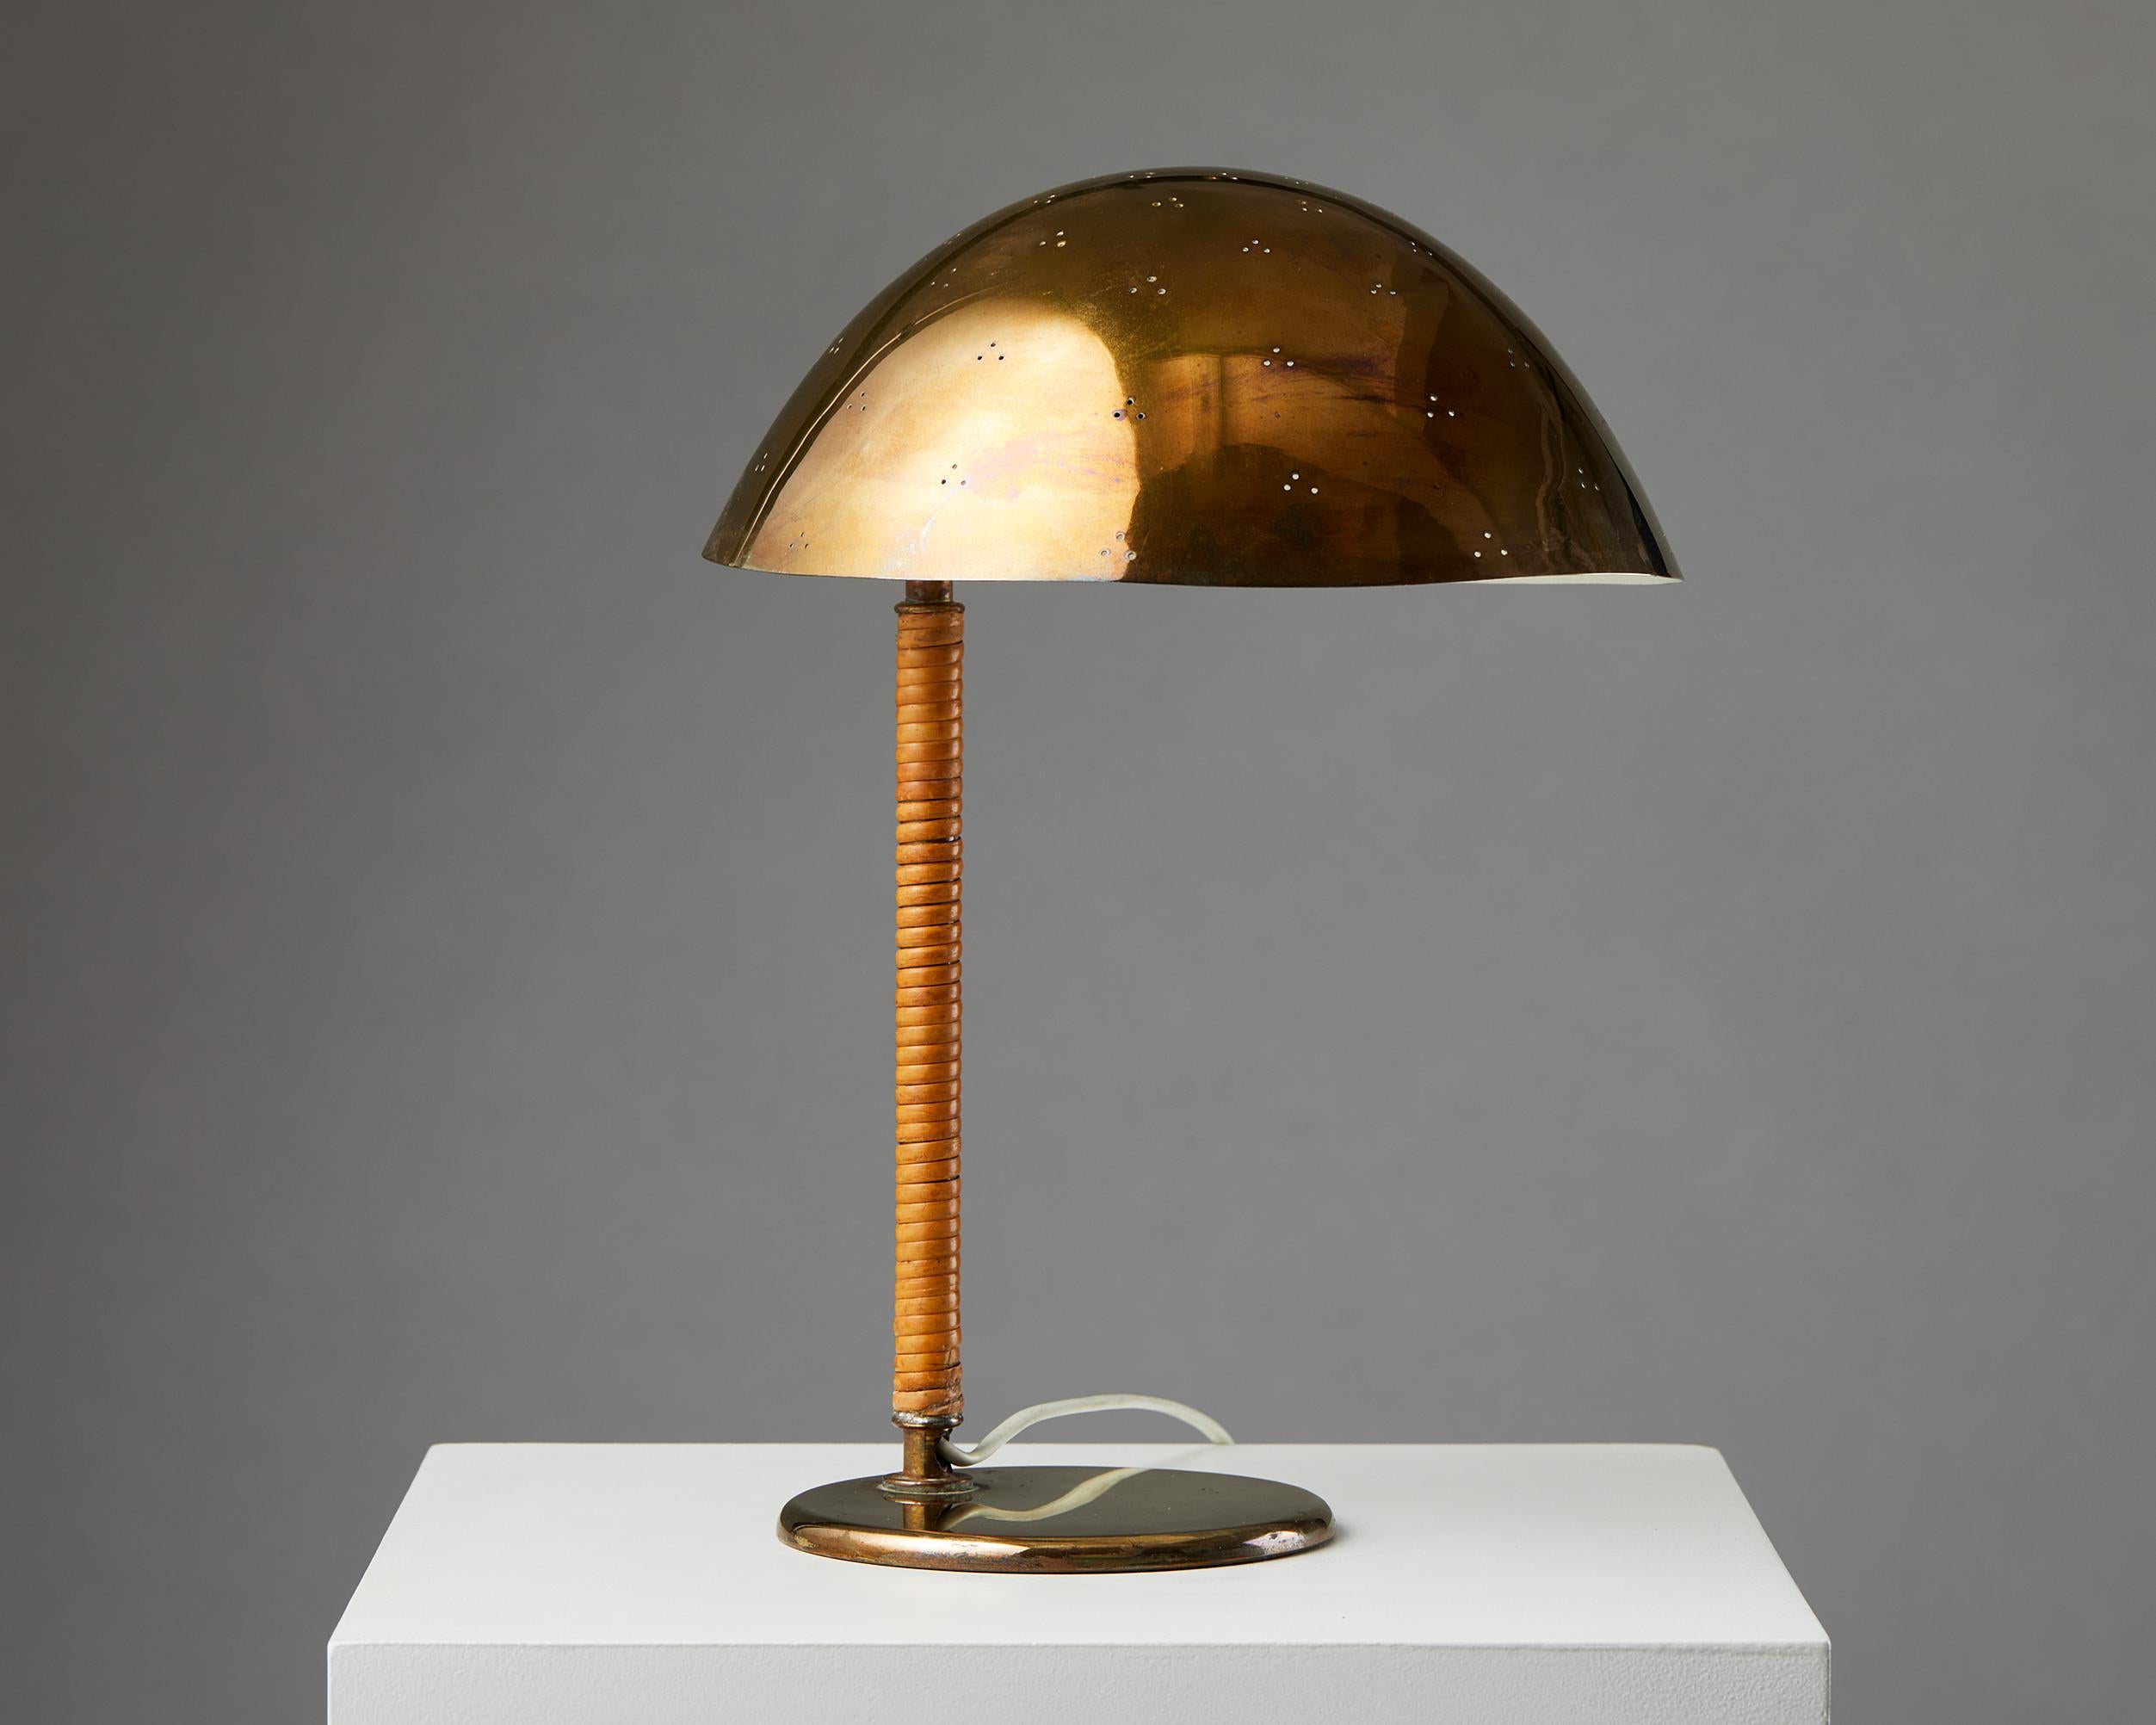 Table lamp model 9209 designed by Paavo Tynell for Taito Oy, Finland, 1950s.

Pierced brass and cane. 

Stamped “OY TAITO AB 9209 MADE IN FINLAND”.

Dimensions:
Measures: H: 38 cm / 15’’
W: 26.5 cm / 10 1/2’’
D: 26 cm / 10 1/4’’.

One of the best